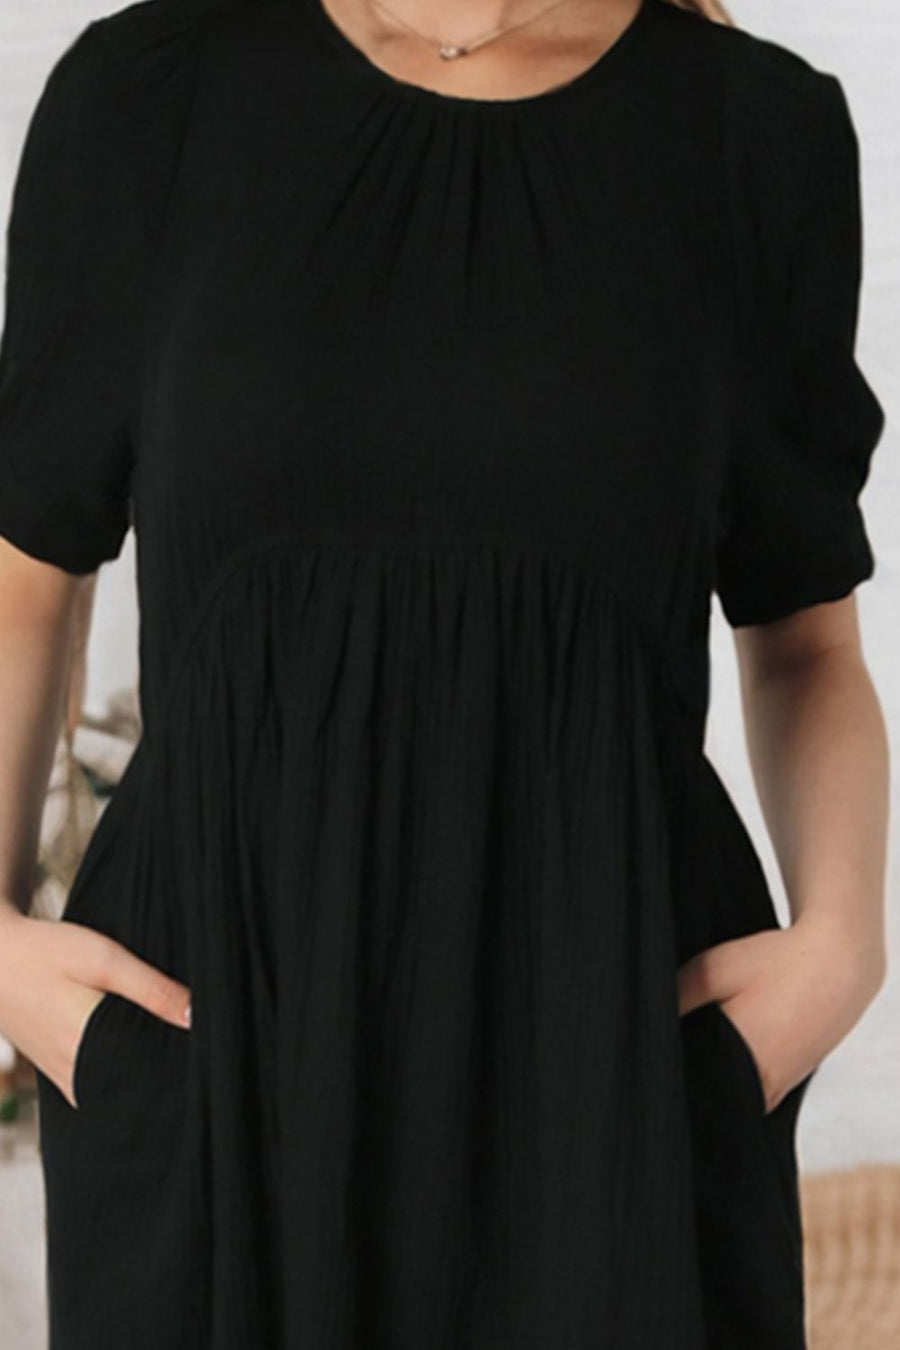 Round Neck Puff Sleeve Dress with Pockets